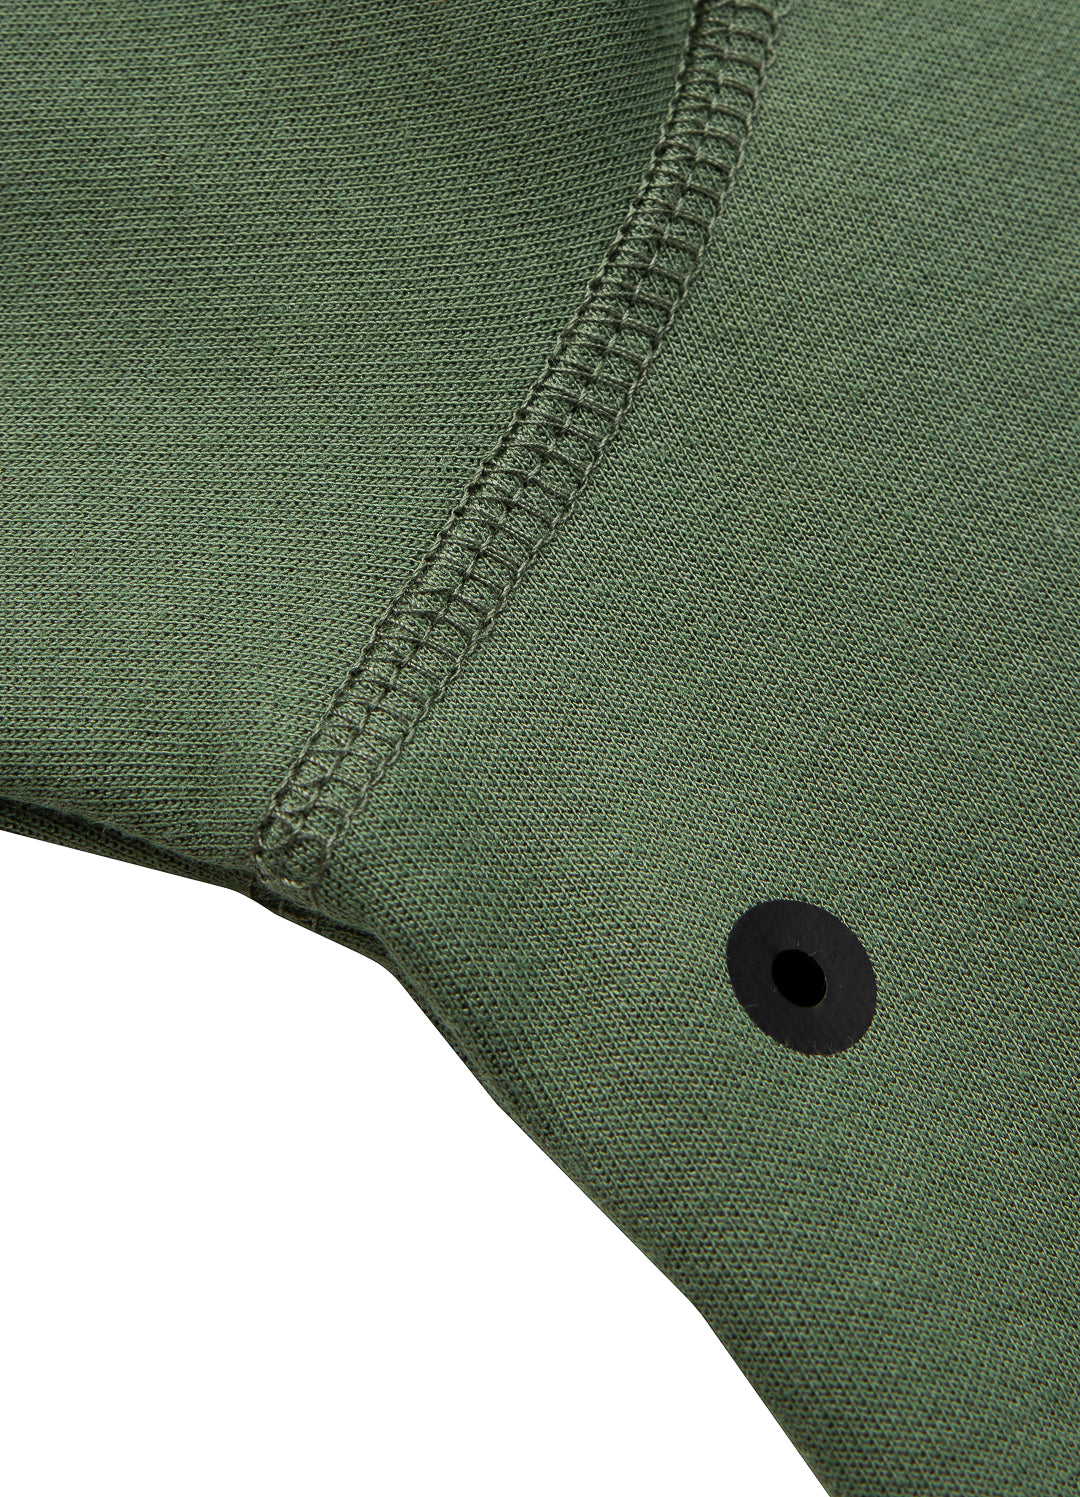 FALCON HILLTOP Olive Hoodie.